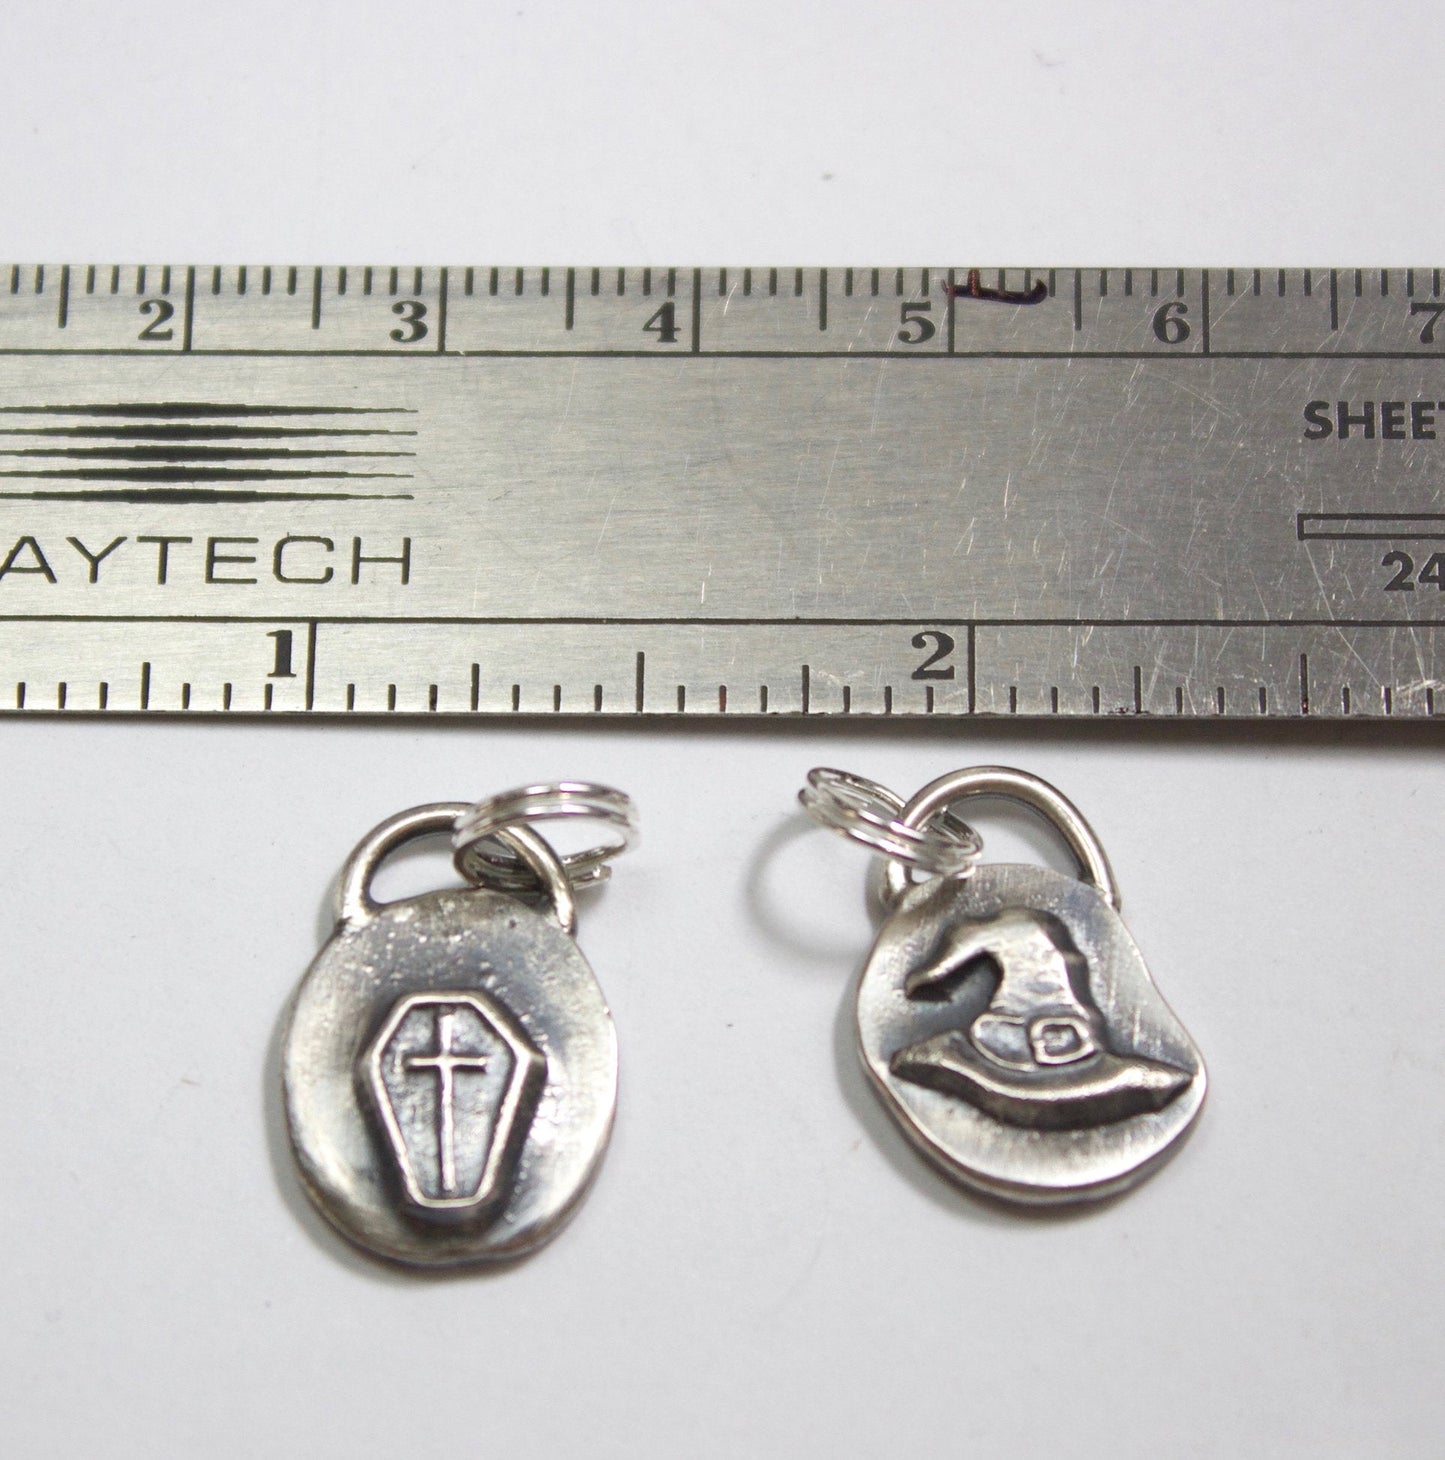 Sterling silver coffin and witches hat charms shown with ruler for scale.